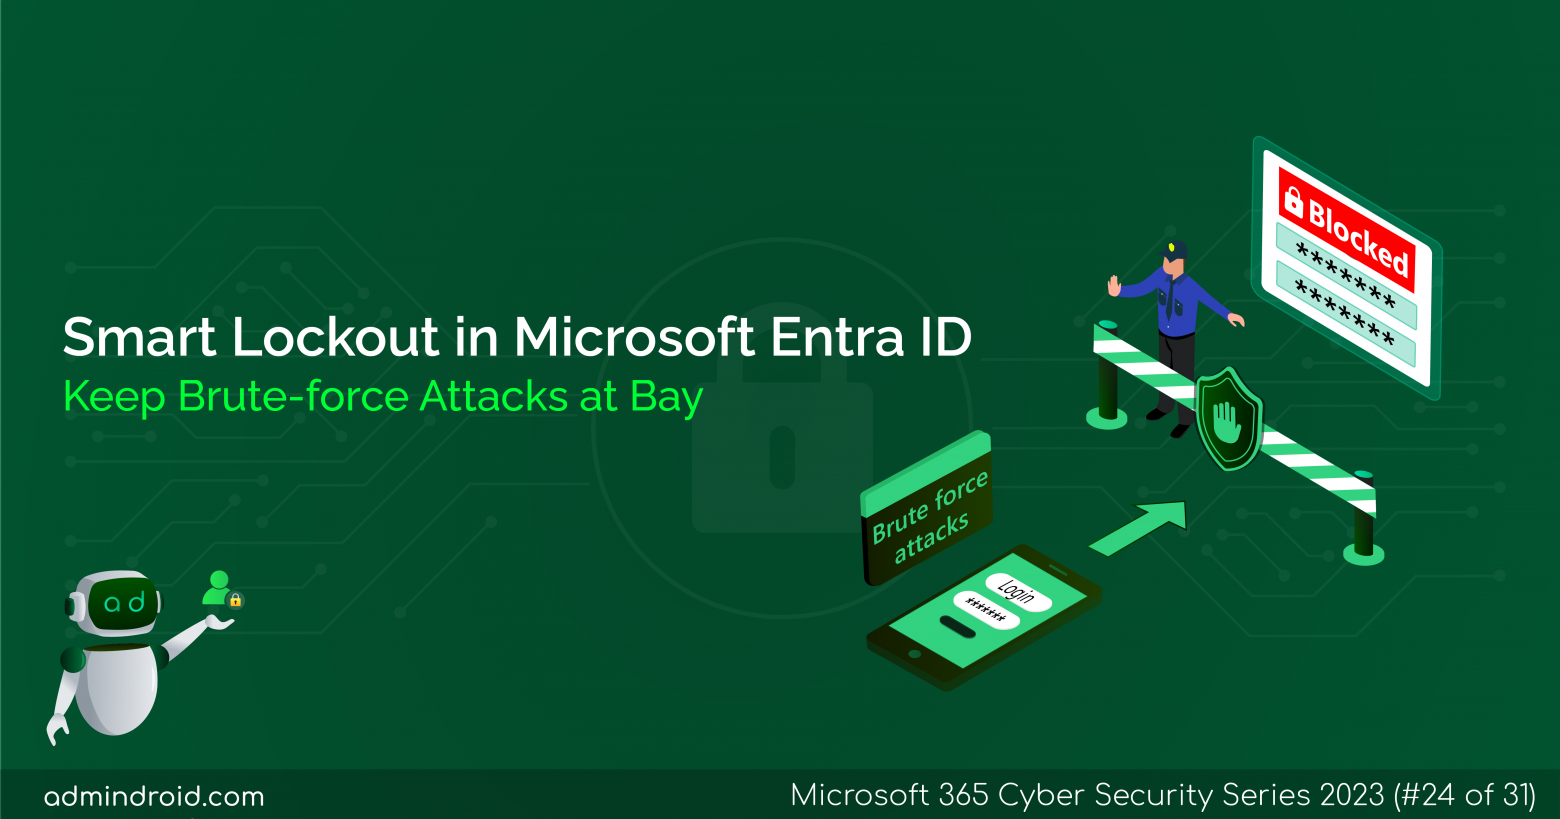 Smart Lockout in Microsoft Entra ID